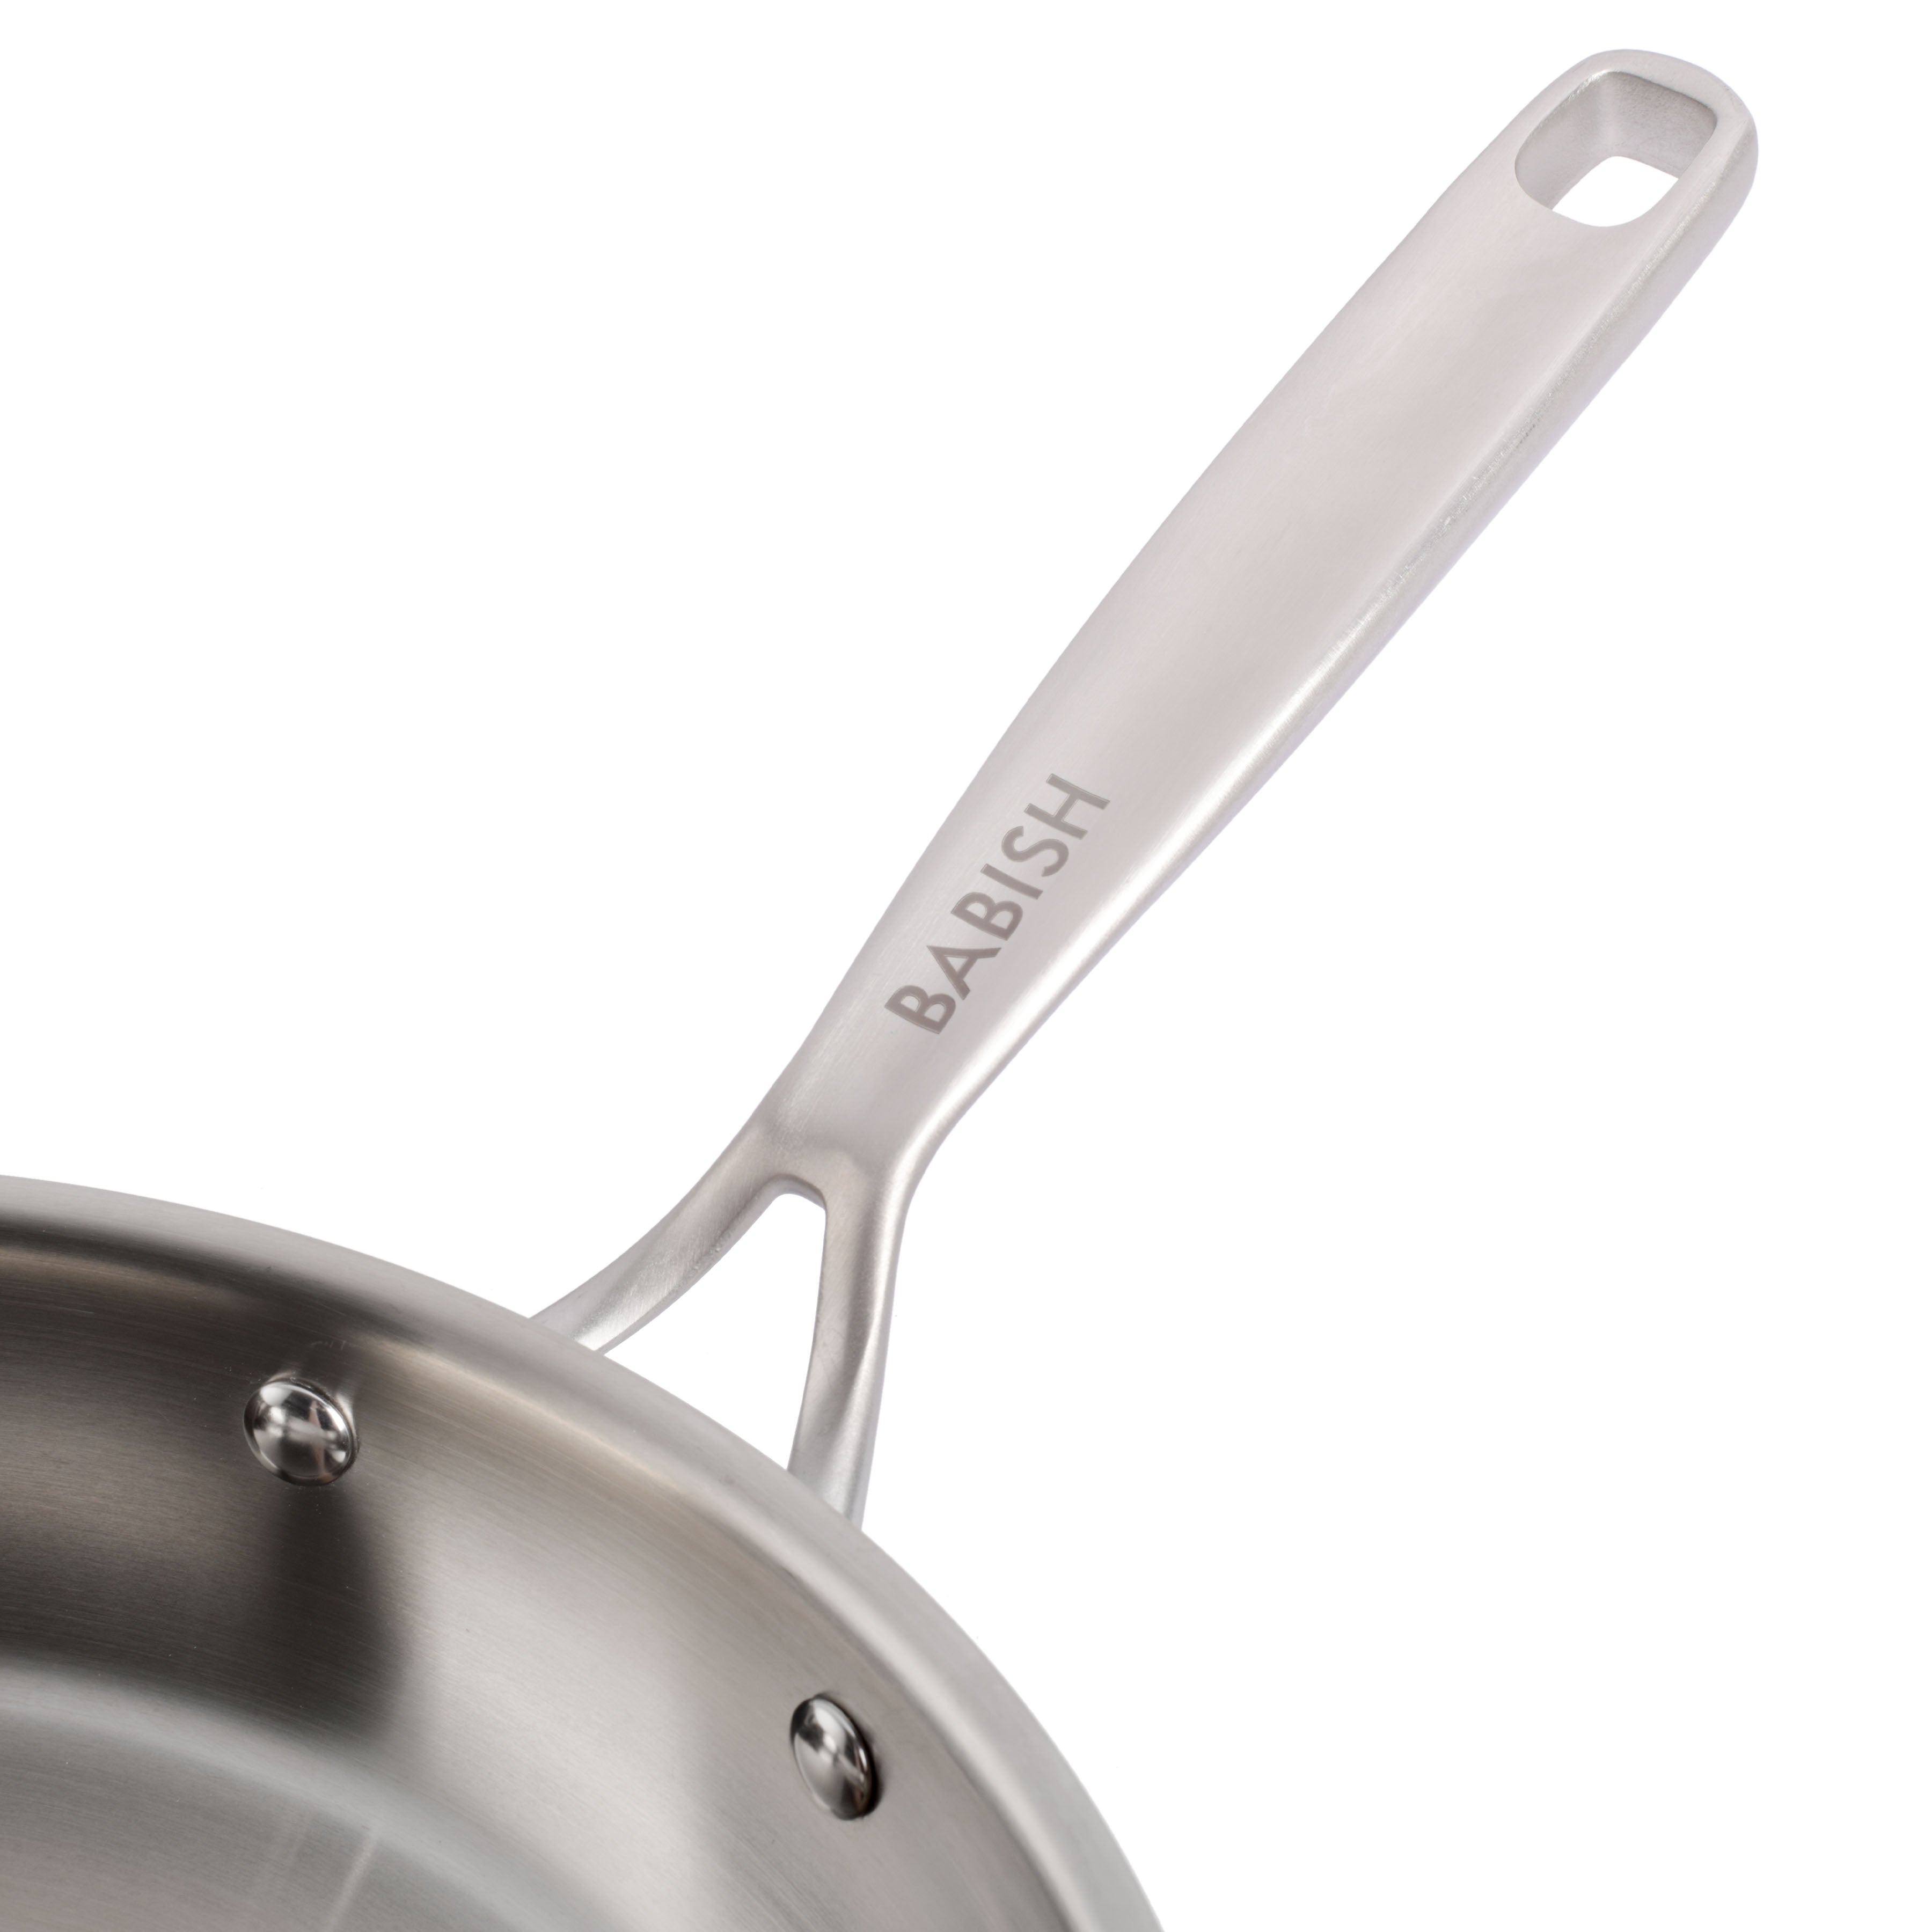 Babish 8 Inch Stainless Steel Triply Professional Grade Fry Pan